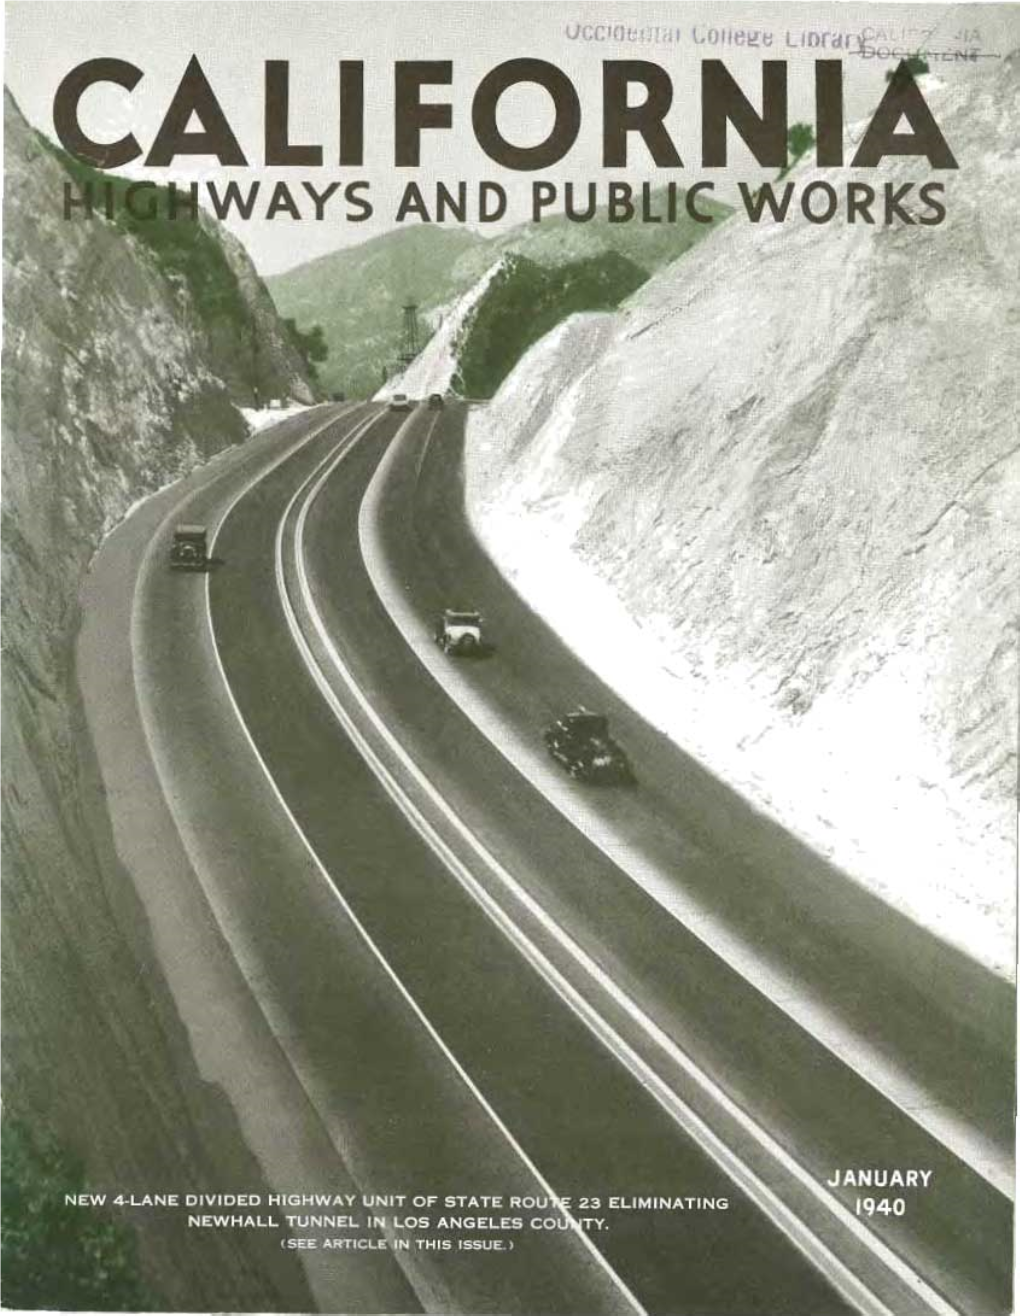 California Highways and Public Works, January 1940